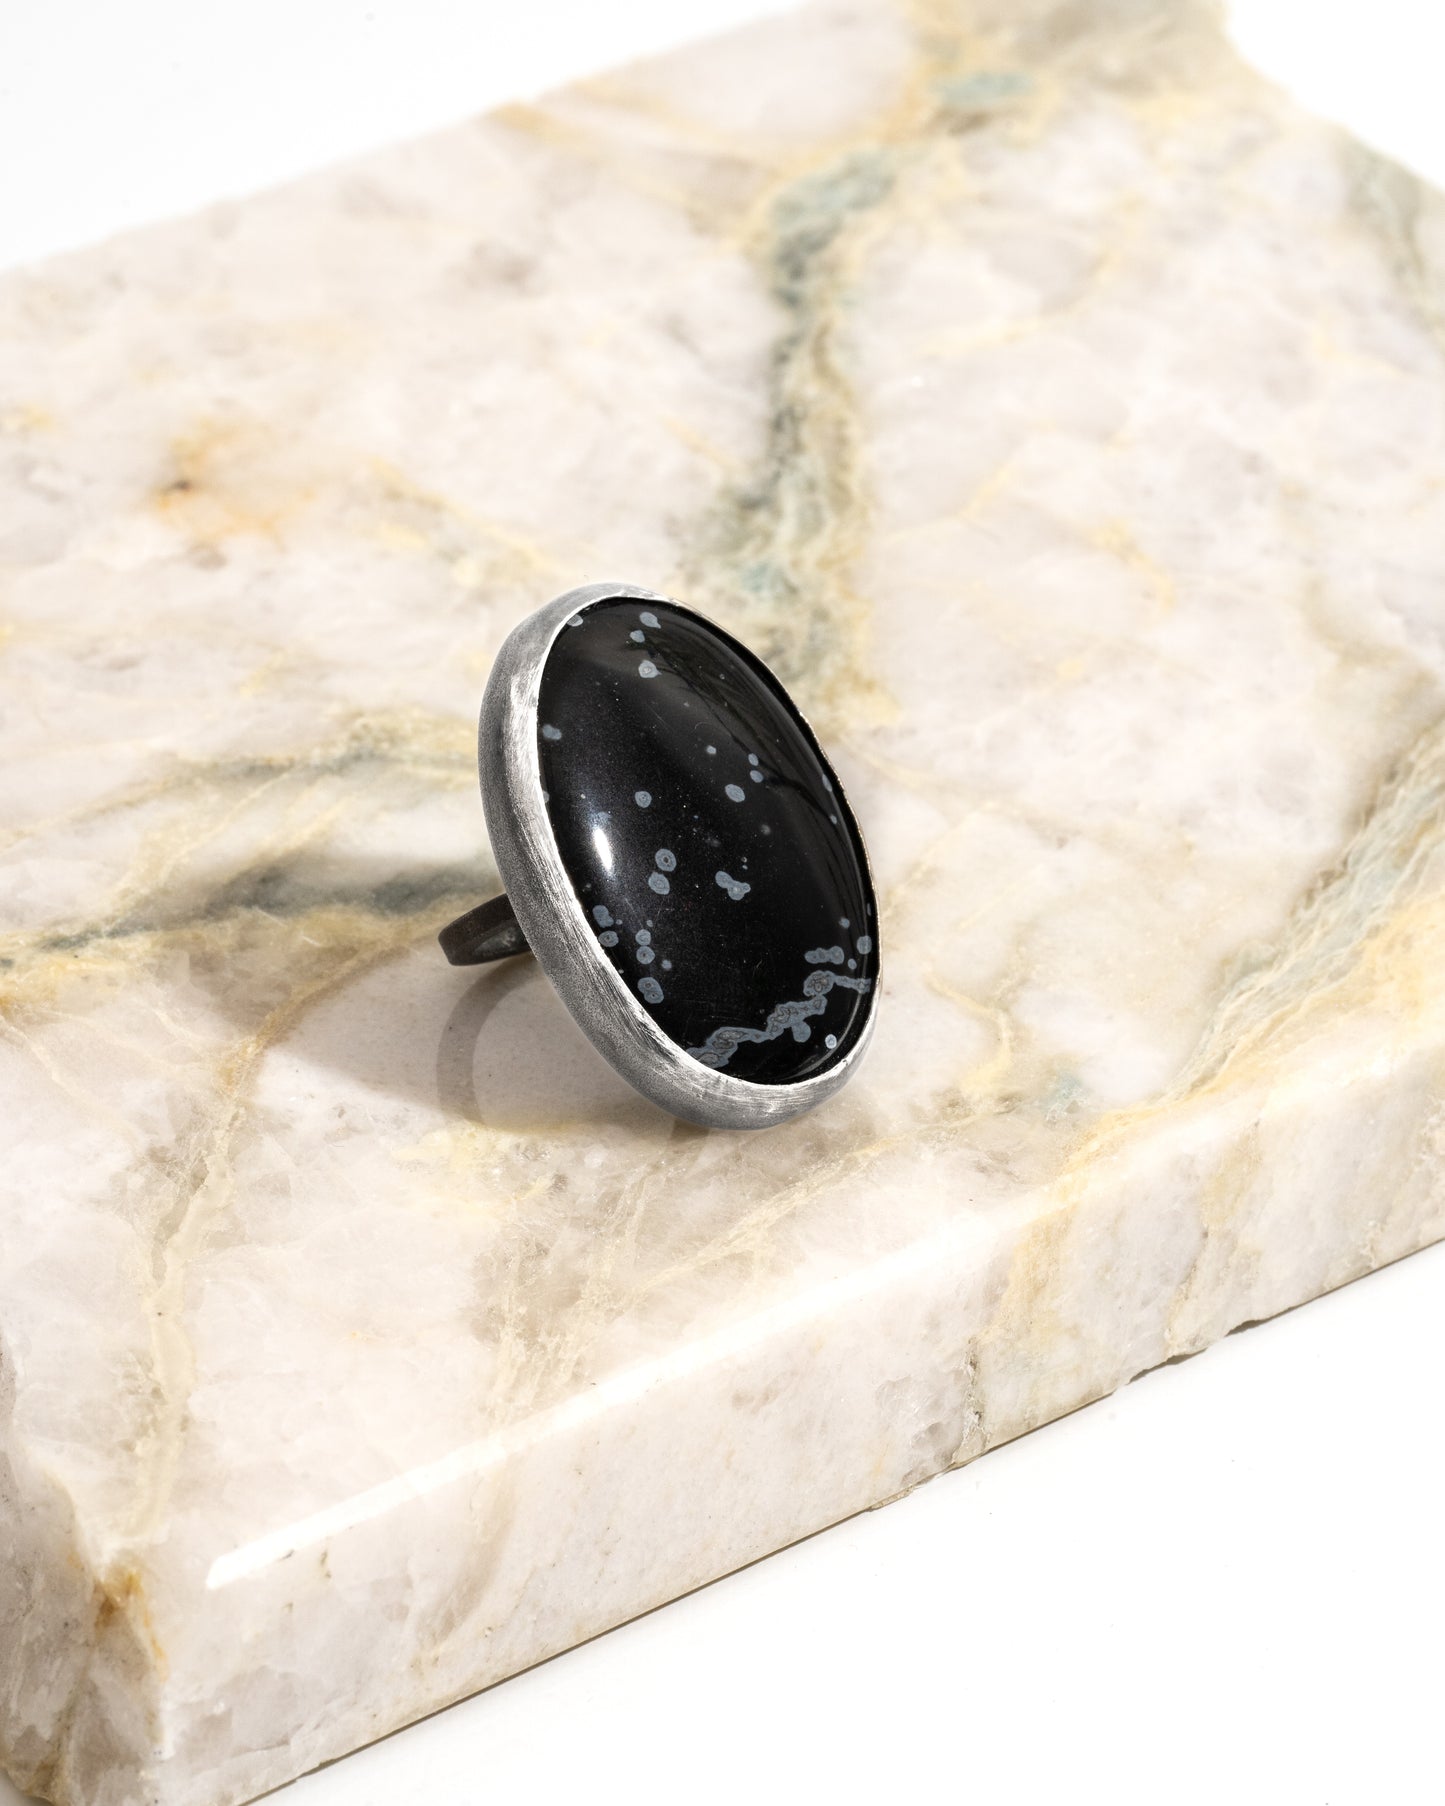 Equilibrium Ring: Snowflake Obsidian Sterling Silver Ring